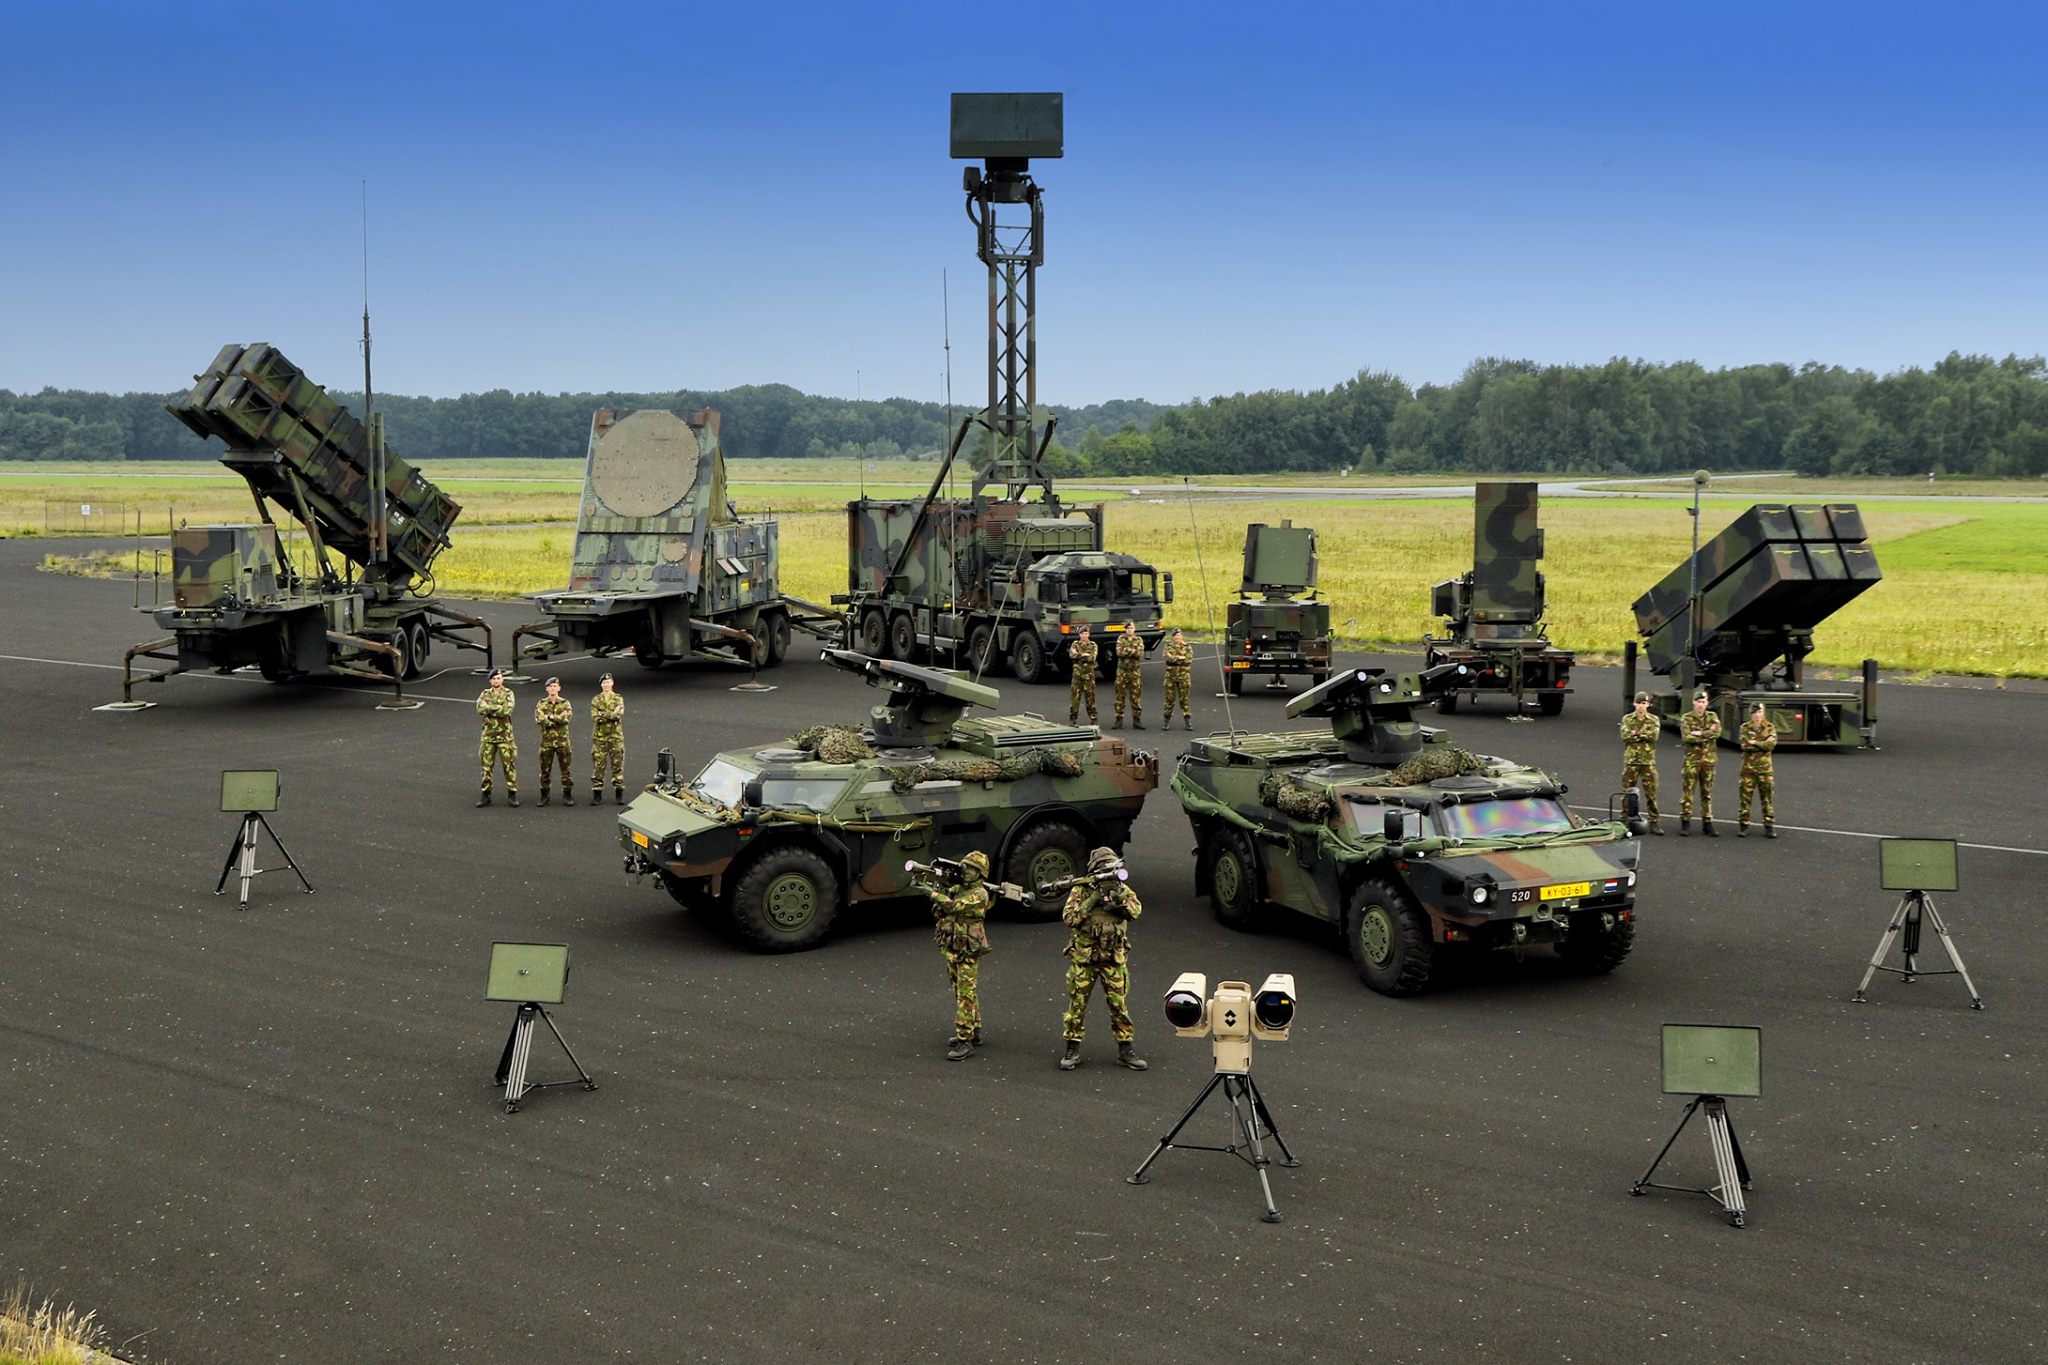 Layered-air-defence-missile-launchers-and-radars-of-Dutch-Armed-Forces-in-2017.-Photo-by-the-Dutch-defence-ministry..jpg